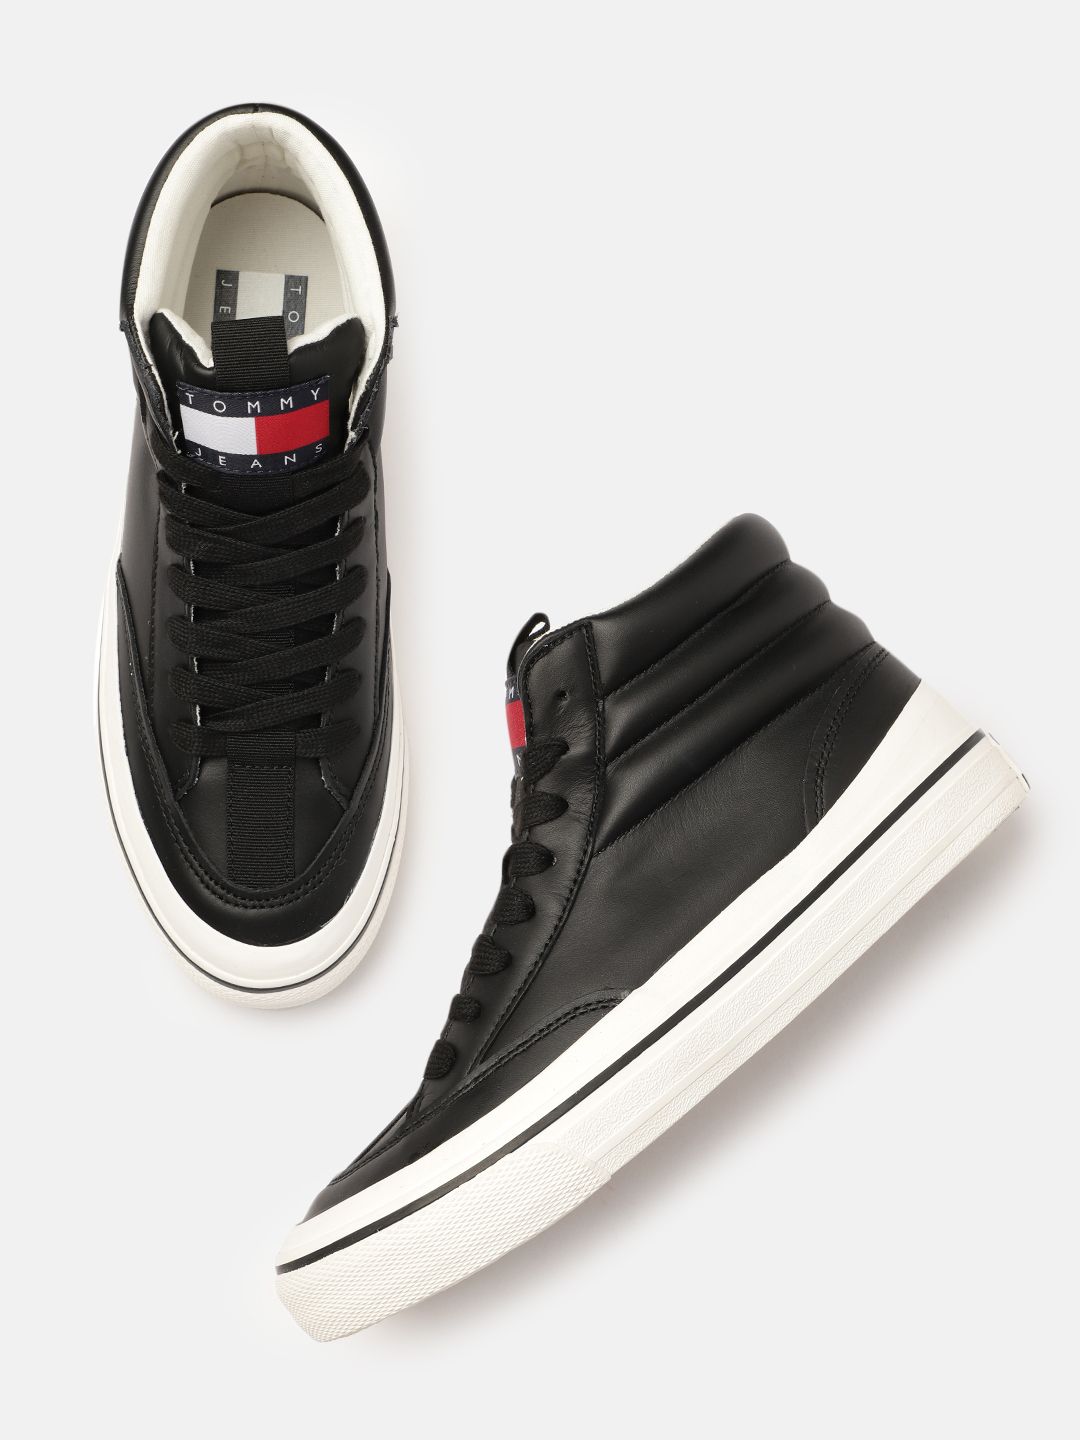 Tommy Hilfiger Women Black Leather Mid-Top Sneakers Price in India